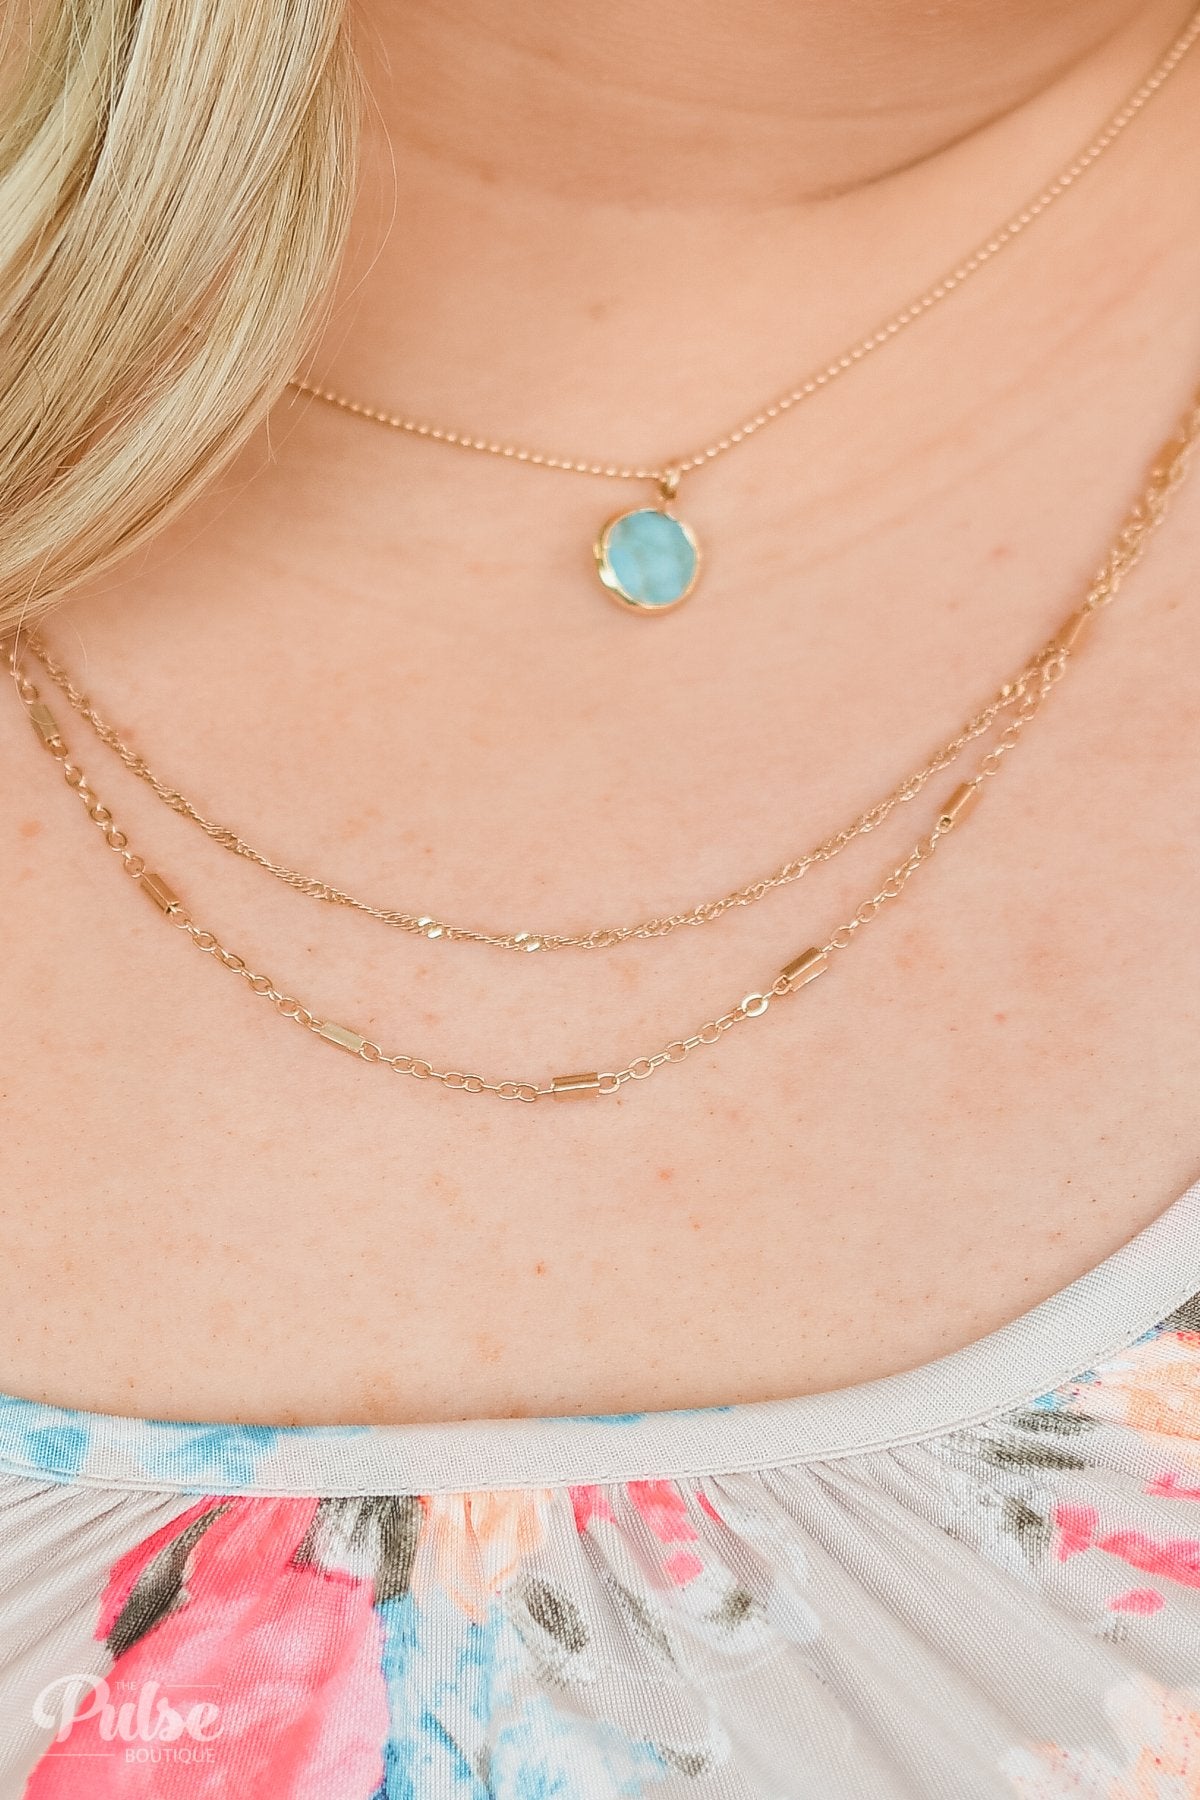 3 Tier Turquoise Stone Necklace- Gold